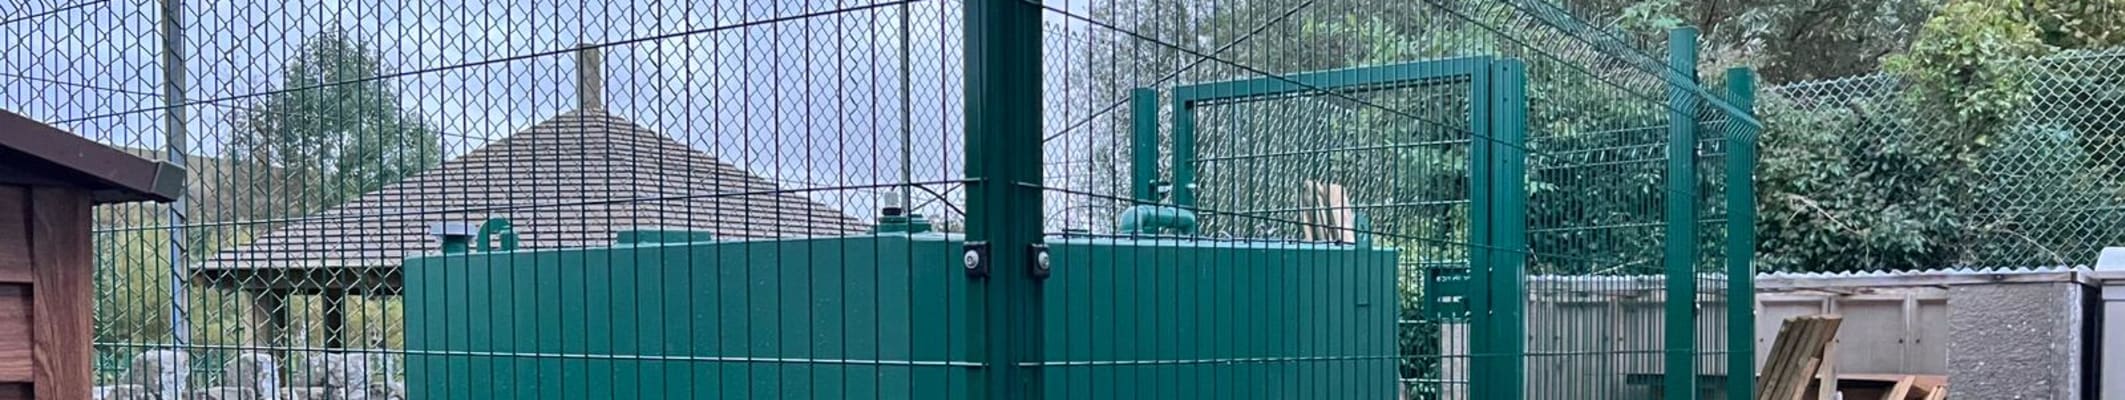 School Oil Tanks Fenced for Safety